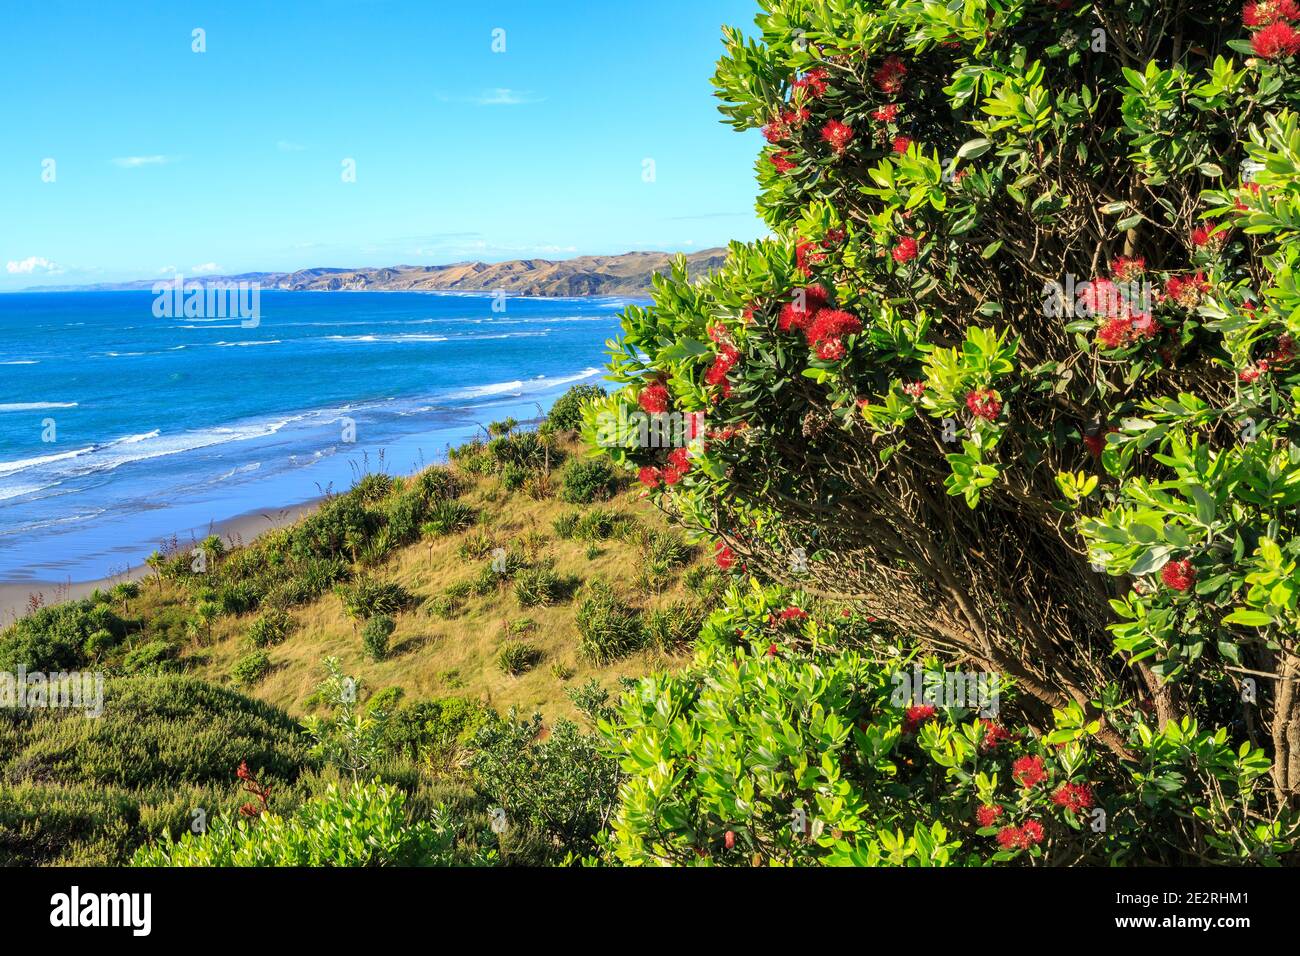 Coastline at Ngarunui Beach, near Raglan, New Zealand. In the foreground is a pohutukawa tree with red summer blossoms Stock Photo